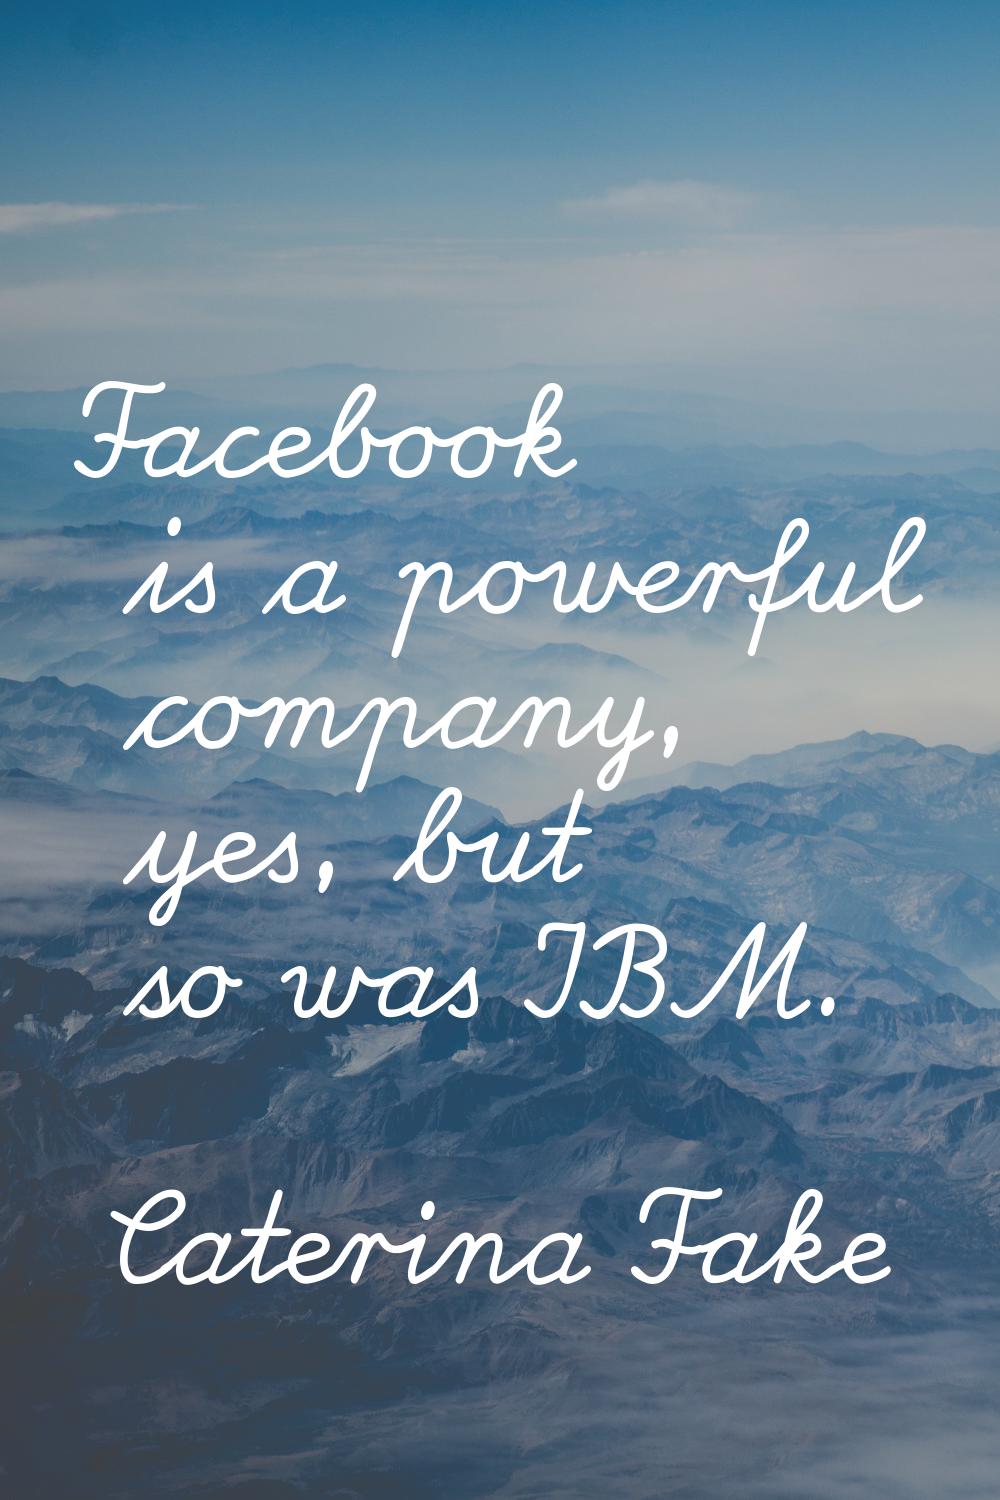 Facebook is a powerful company, yes, but so was IBM.